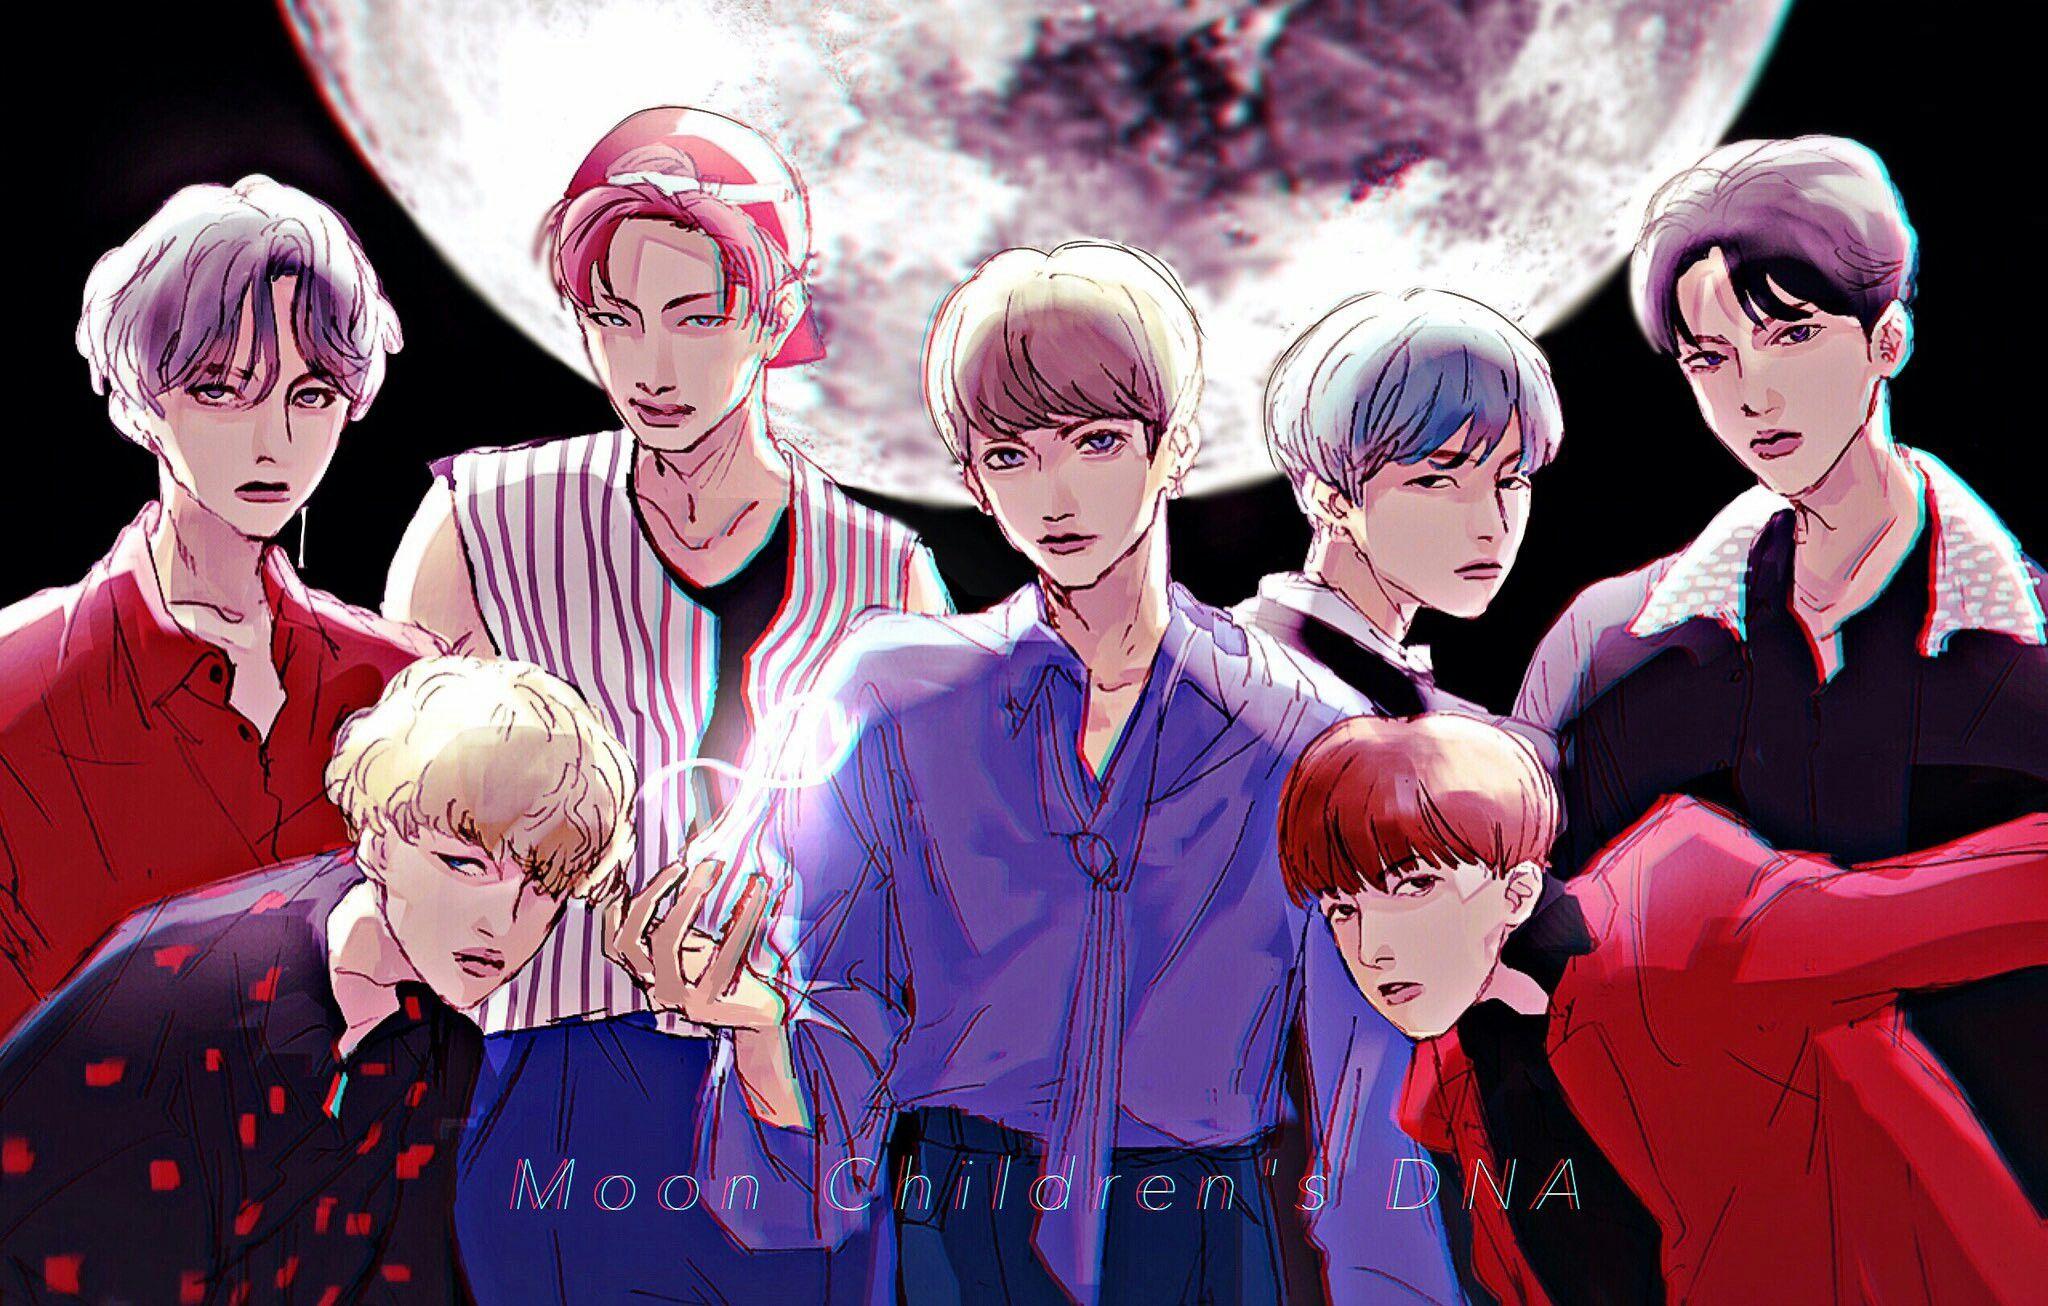 Free Wallpaper: Bts Anime Wallpapers Hd.